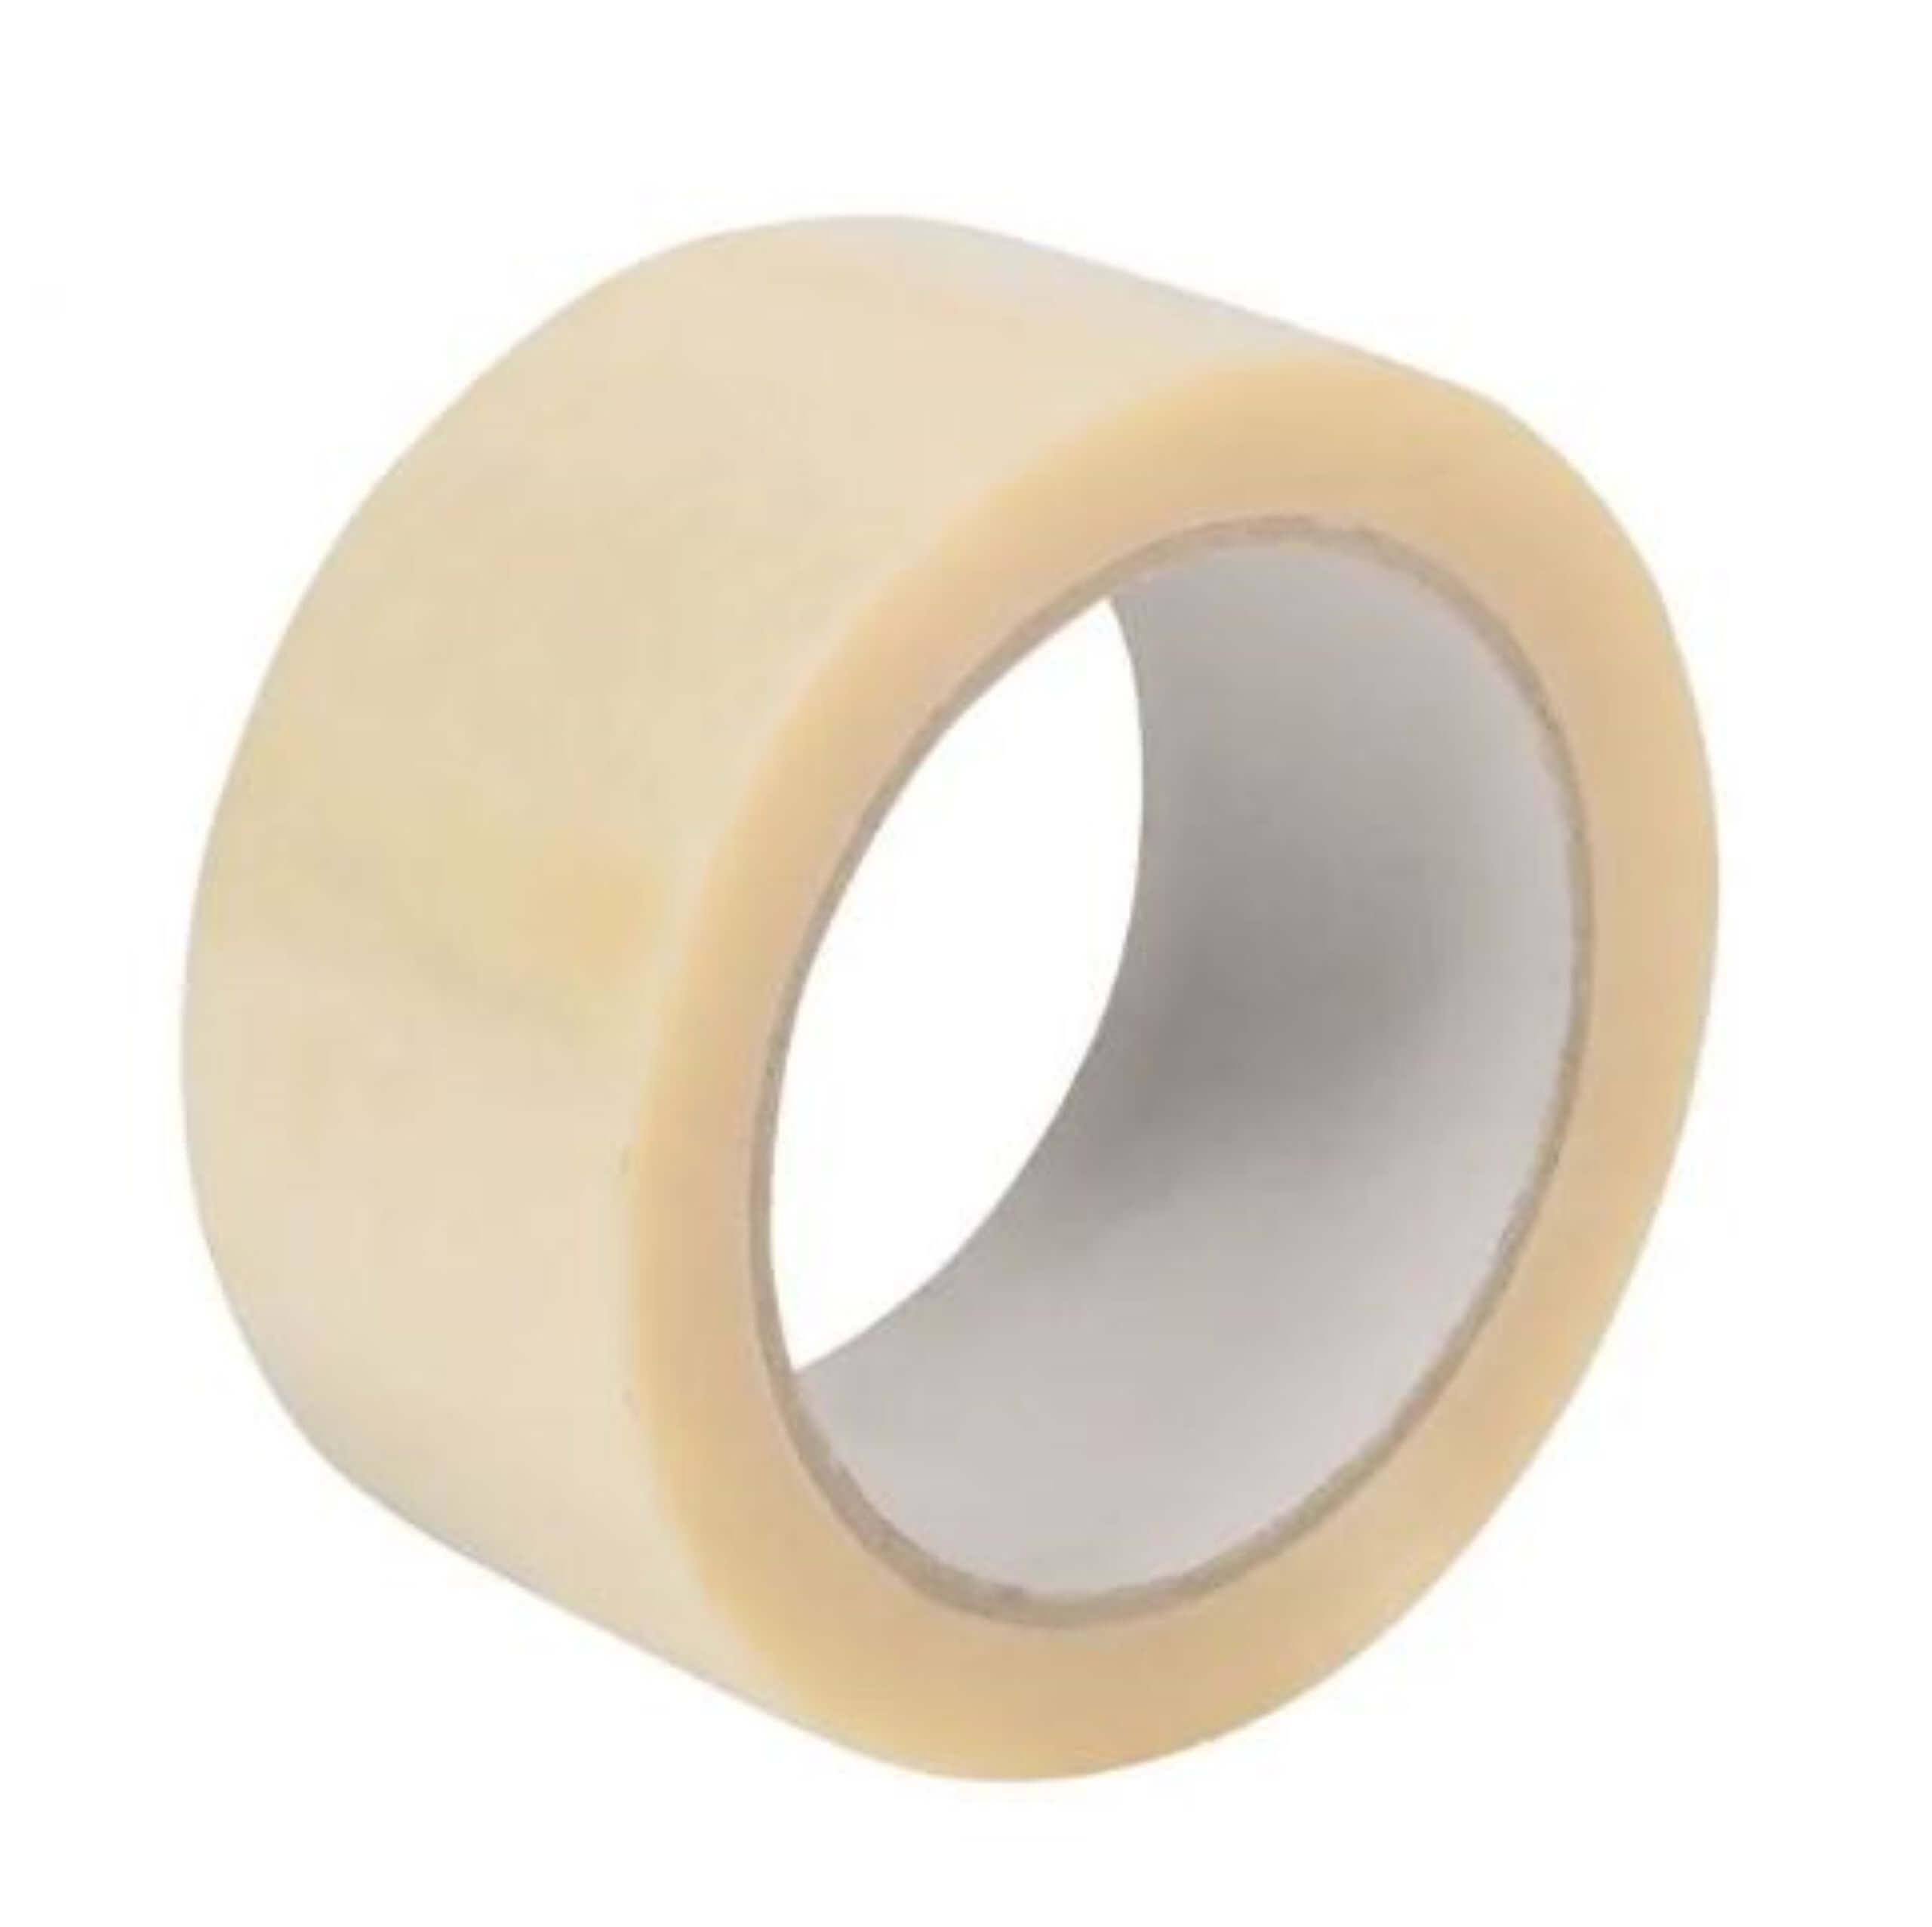 An image of our vinyl adhesive tape.